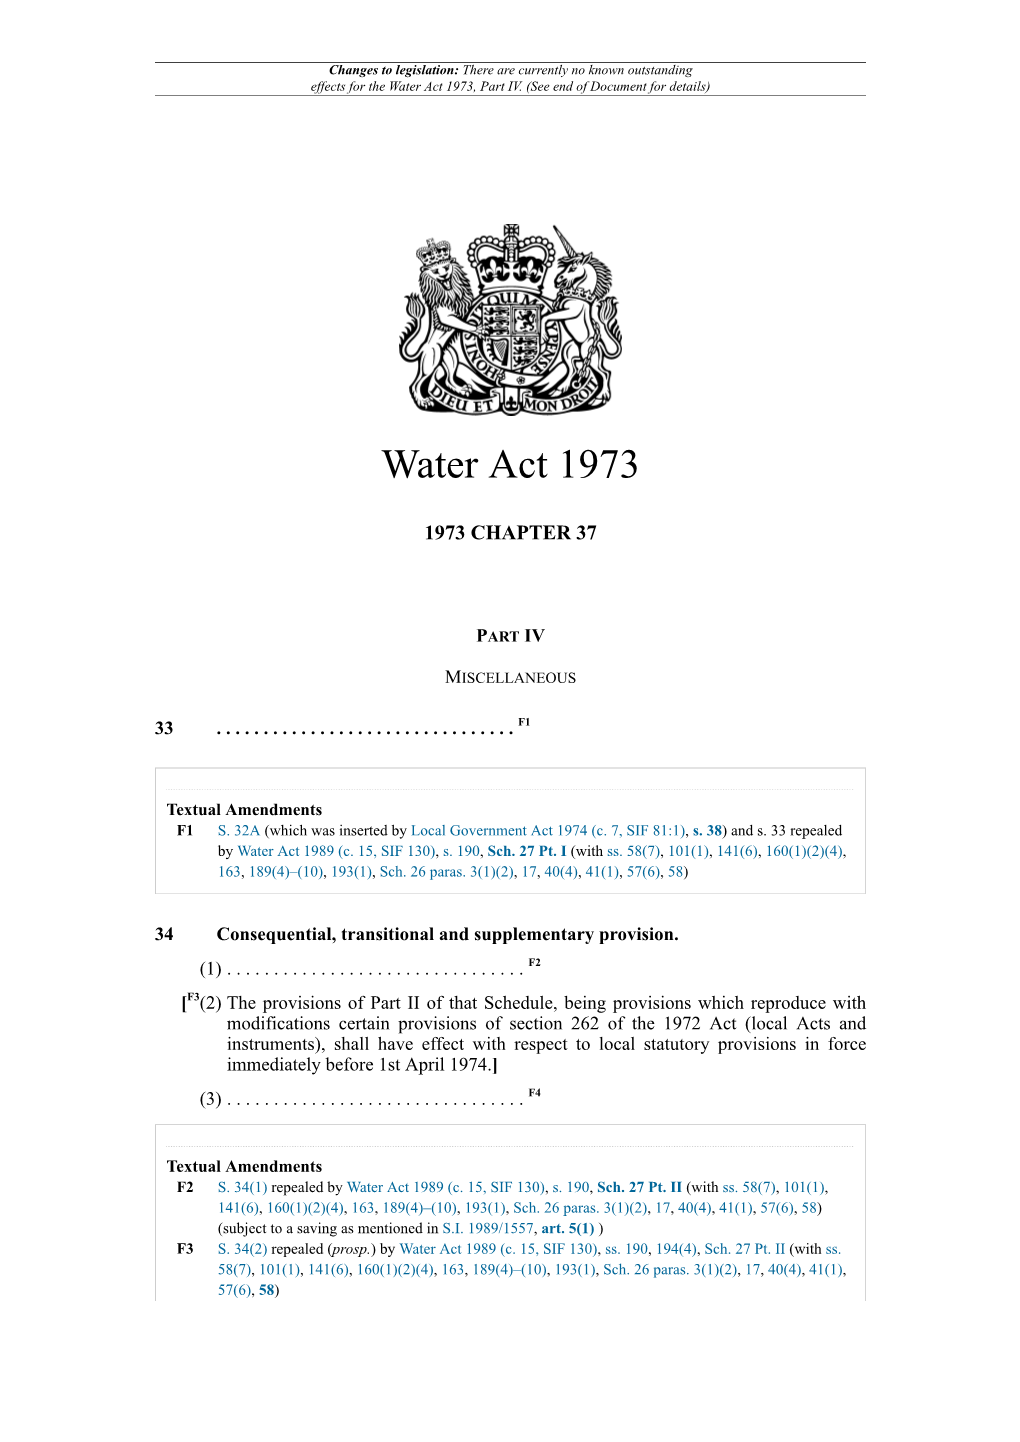 Water Act 1973, Part IV